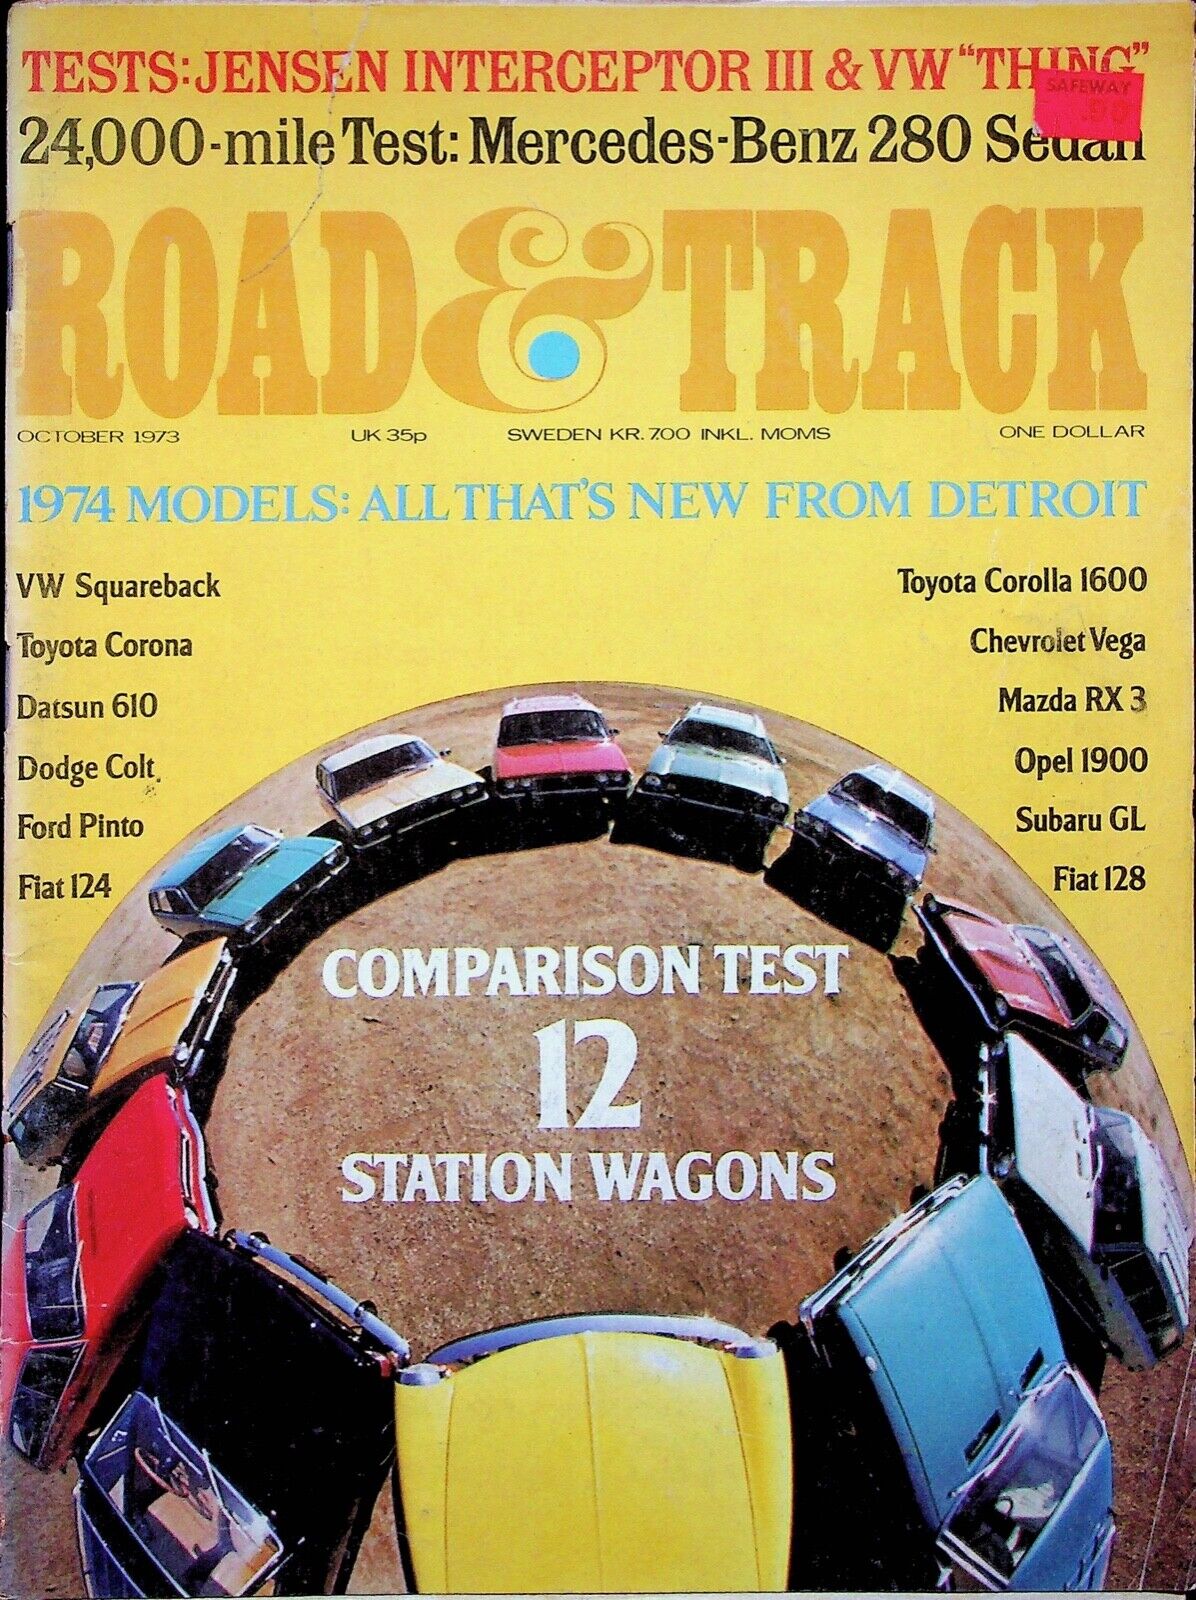 1974 MODELS: ALL THAT'S NEW FROM DETROIT - ROAD & TRACK MAGAZINE - 1973 OCTOBER